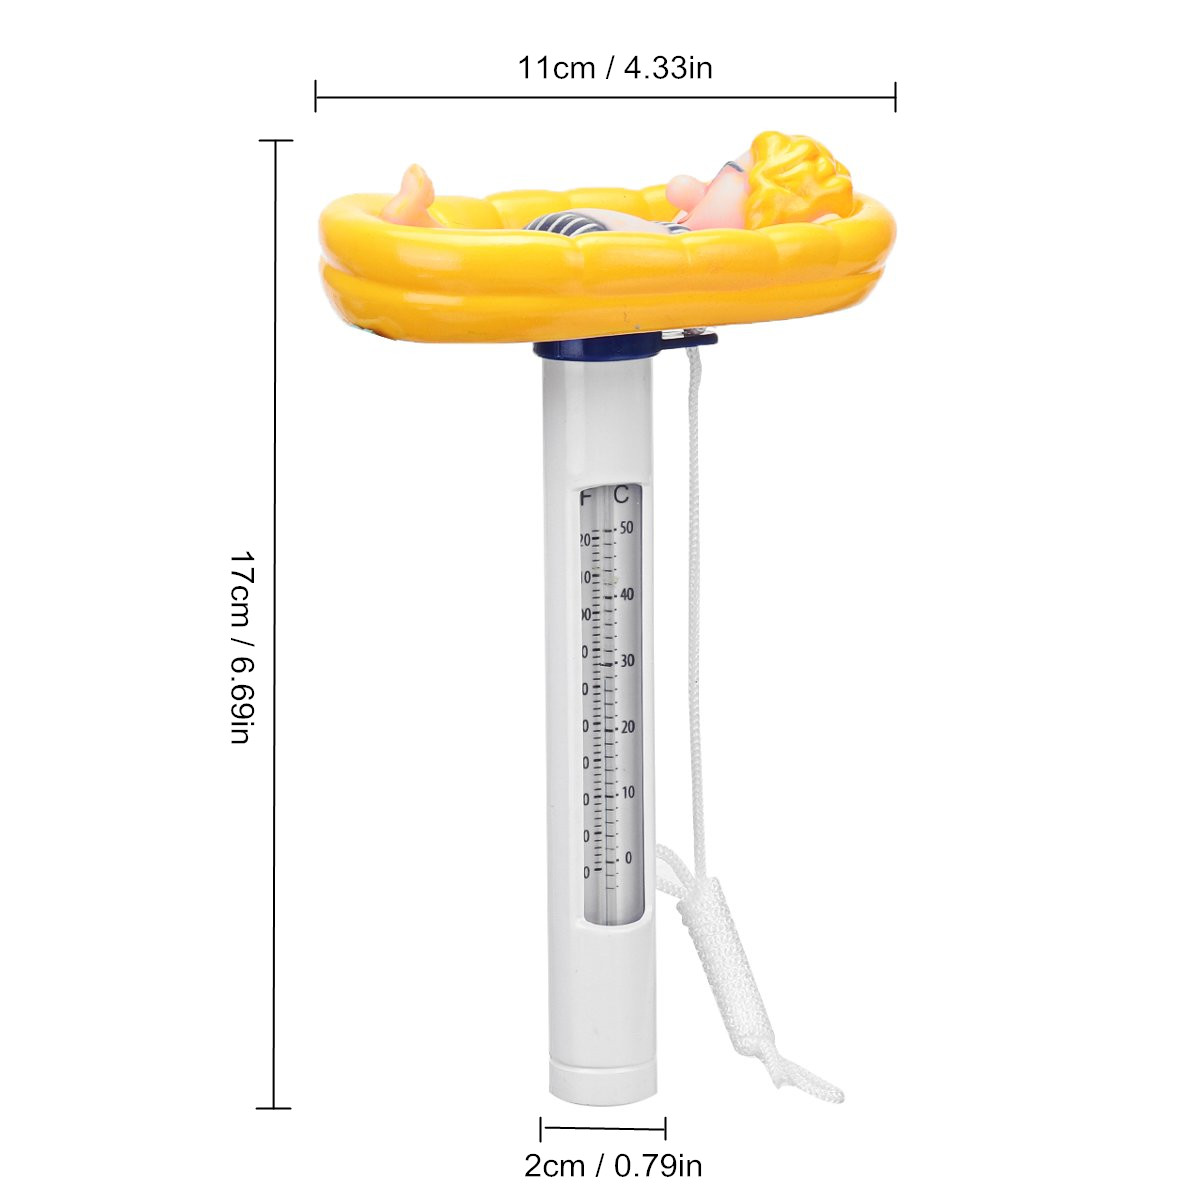 Cartoon-Shatter-Resistant-Floating-Pool-Thermometer-With-String-For-Swimming-Pools-Spas-Hot-Tubs-Wat-1934965-13